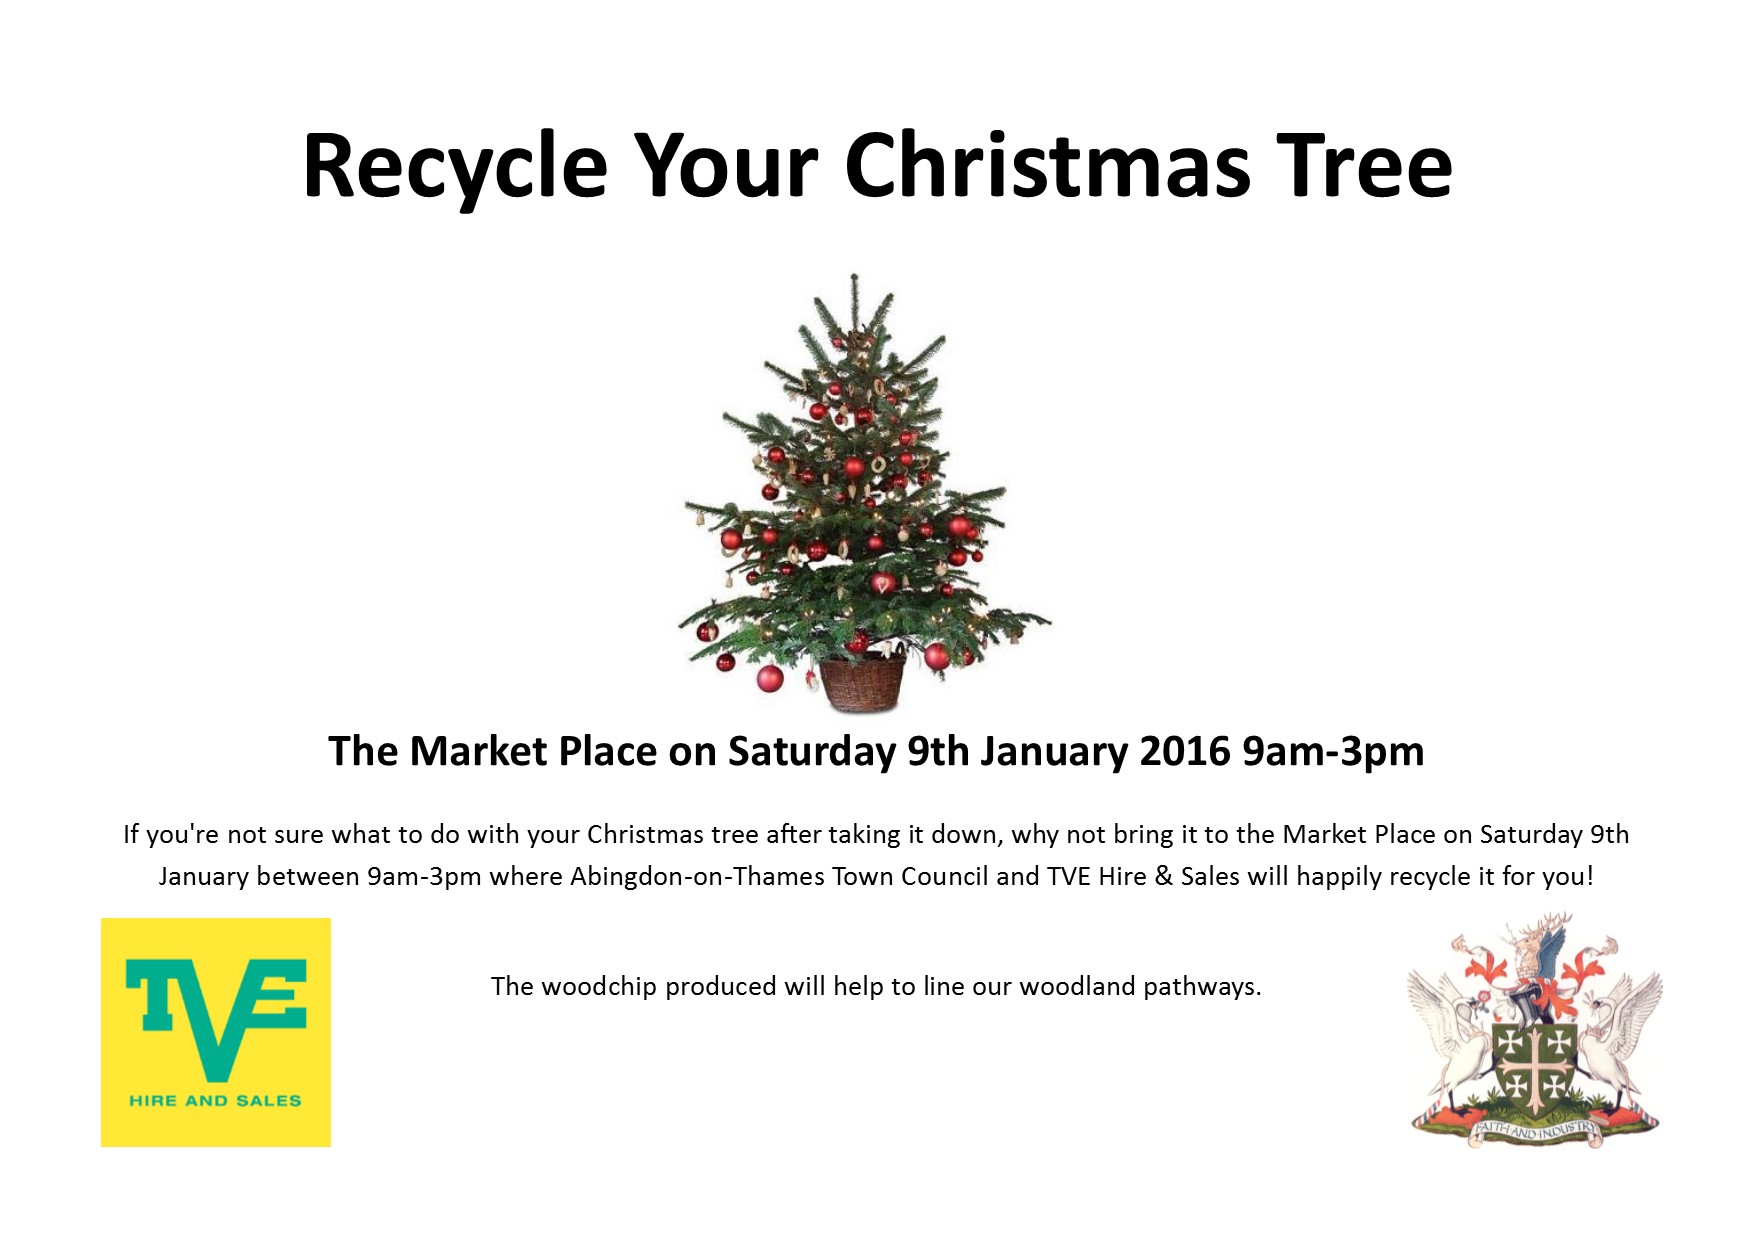 Recycle your Christmas tree